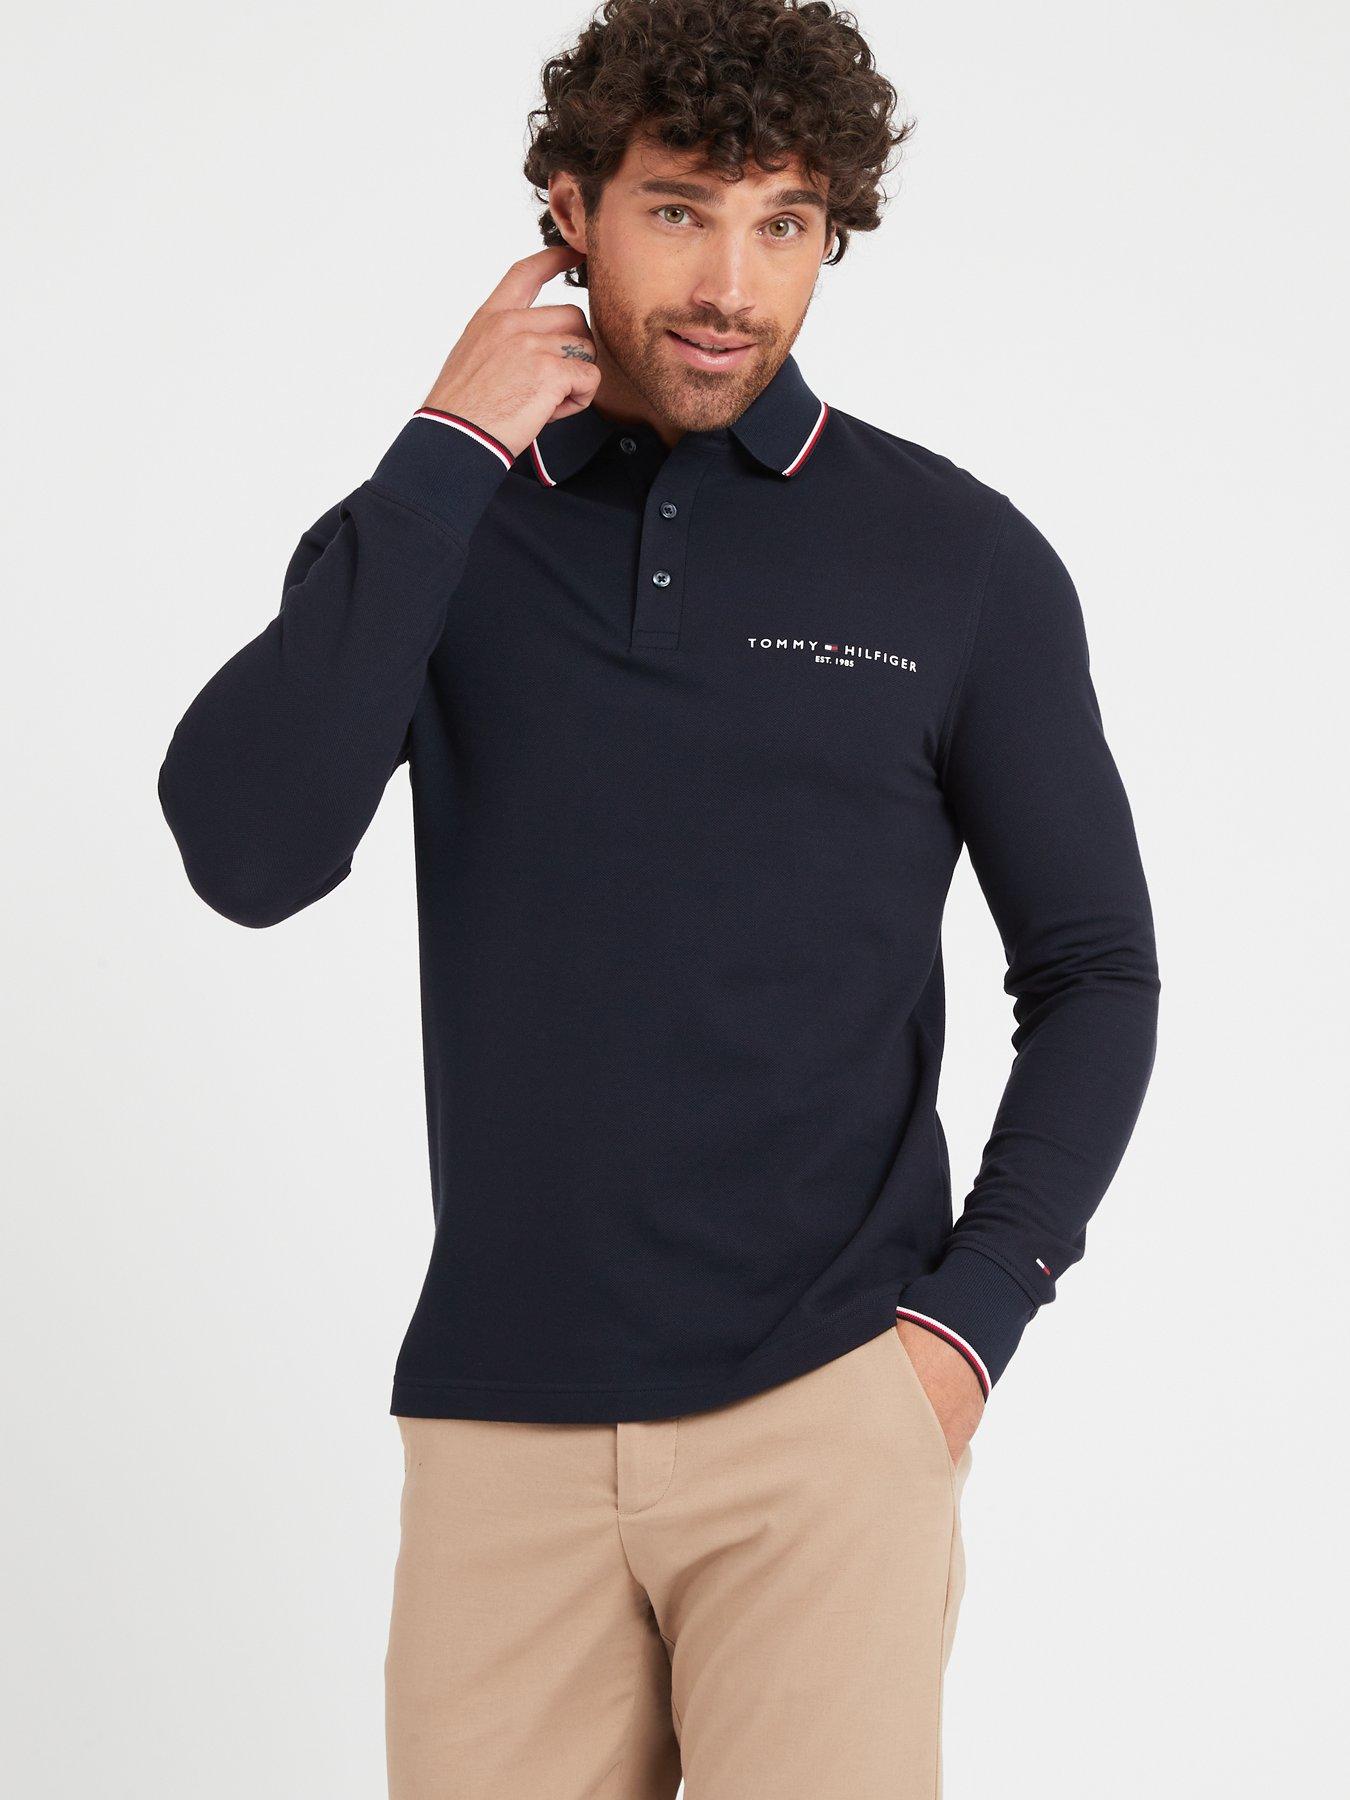 Men T-shirts | Tommy hilfiger & | Month | polos This